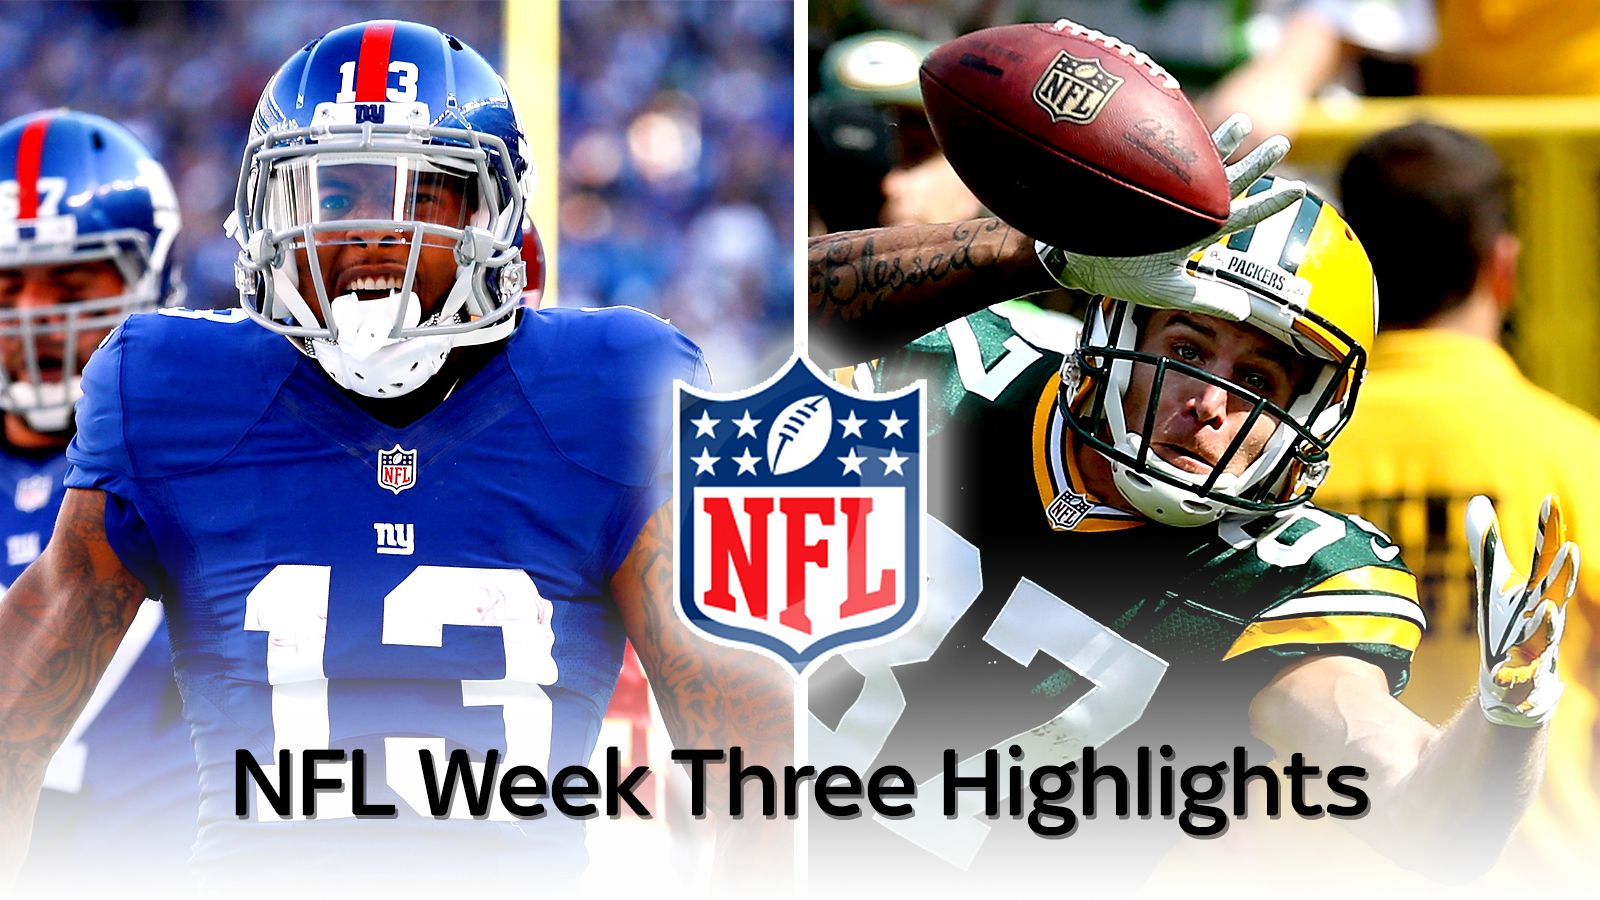 Highlights from week three in the NFL as Carson Wentz and Philadelphia